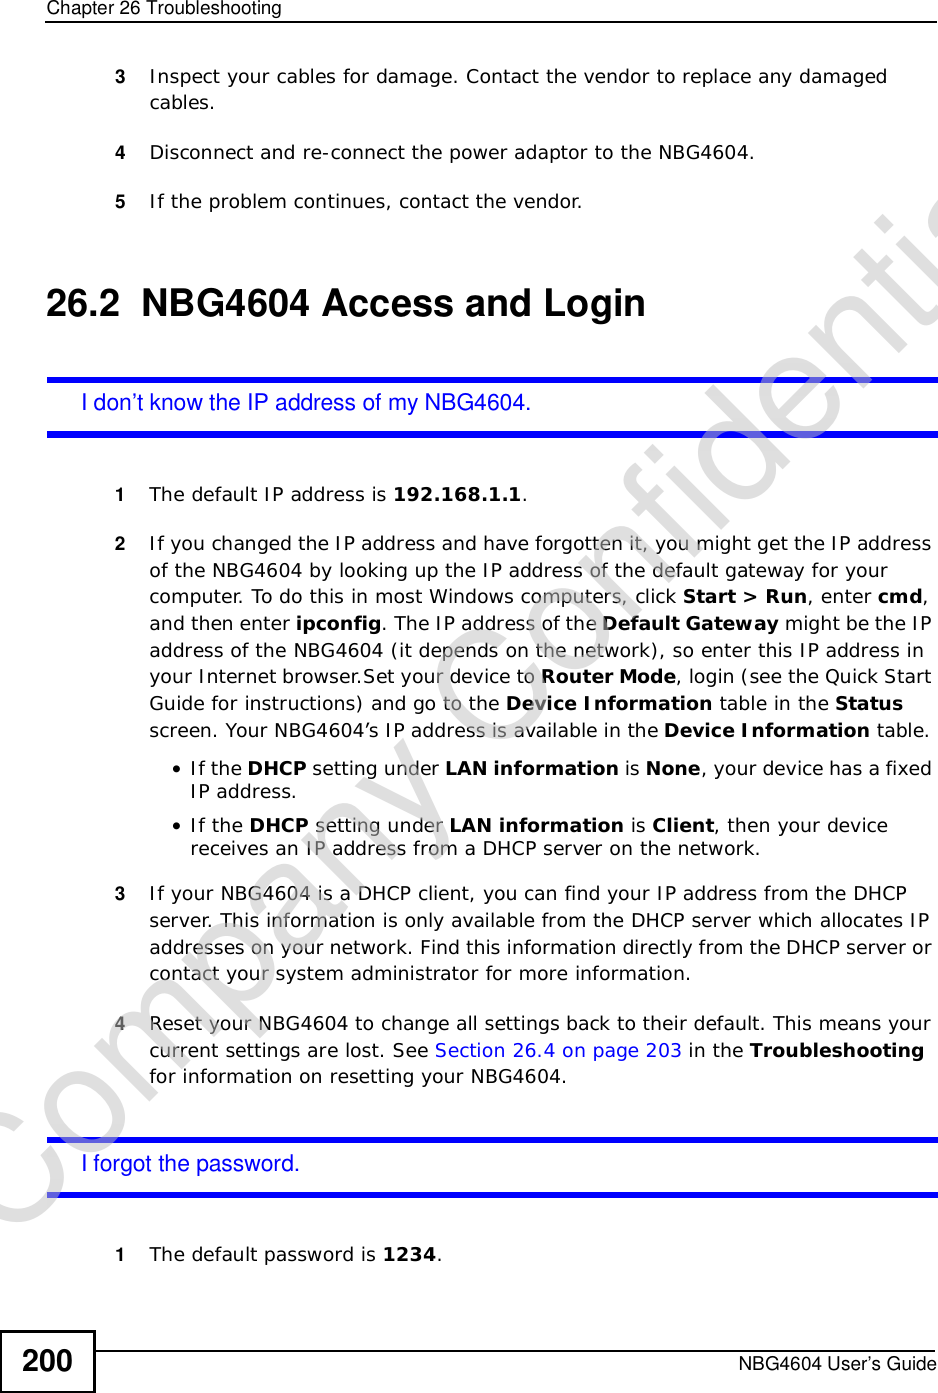 Chapter 26TroubleshootingNBG4604 User’s Guide2003Inspect your cables for damage. Contact the vendor to replace any damaged cables.4Disconnect and re-connect the power adaptor to the NBG4604. 5If the problem continues, contact the vendor.26.2  NBG4604 Access and LoginI don’t know the IP address of my NBG4604.1The default IP address is 192.168.1.1.2If you changed the IP address and have forgotten it, you might get the IP address of the NBG4604 by looking up the IP address of the default gateway for your computer. To do this in most Windows computers, click Start &gt; Run, enter cmd,and then enter ipconfig. The IP address of the Default Gateway might be the IP address of the NBG4604 (it depends on the network), so enter this IP address in your Internet browser.Set your device to Router Mode, login (see the Quick Start Guide for instructions) and go to the Device Information table in the Statusscreen. Your NBG4604’s IP address is available in the Device Information table. •If the DHCP setting under LAN information is None, your device has a fixed IP address. •If the DHCP setting under LAN information is Client, then your device receives an IP address from a DHCP server on the network. 3If your NBG4604 is a DHCP client, you can find your IP address from the DHCP server. This information is only available from the DHCP server which allocates IP addresses on your network. Find this information directly from the DHCP server or contact your system administrator for more information.4Reset your NBG4604 to change all settings back to their default. This means your current settings are lost. See Section 26.4 on page 203 in the Troubleshootingfor information on resetting your NBG4604. I forgot the password.1The default password is 1234.Company Confidential